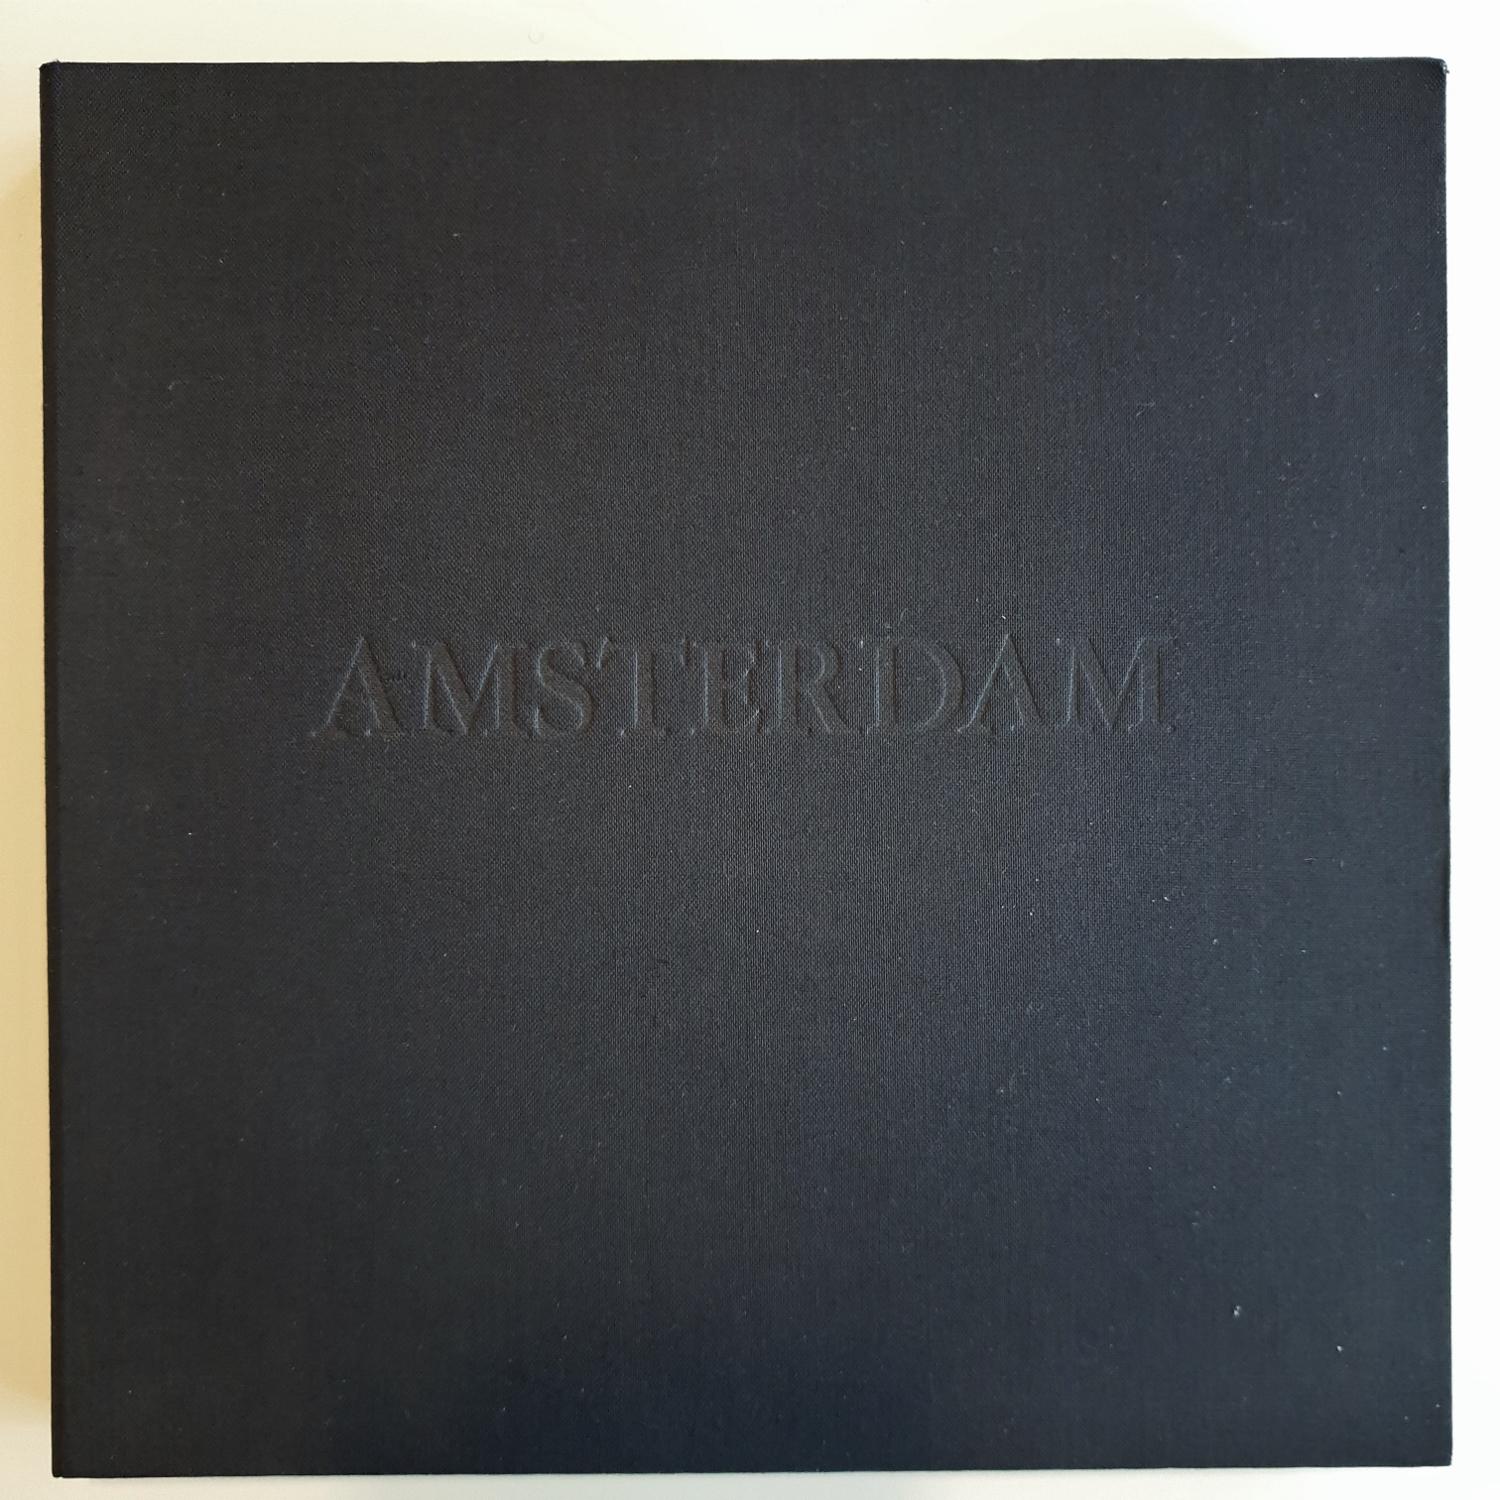 Amsterdam IX is an intriguing early career aquatint dry-needle etch print by renowned French-Dutch artist Olivier Julia. It depicts a detail of an old Amsterdam house facade is both abstract and realistic at the same time. The paper used is 240